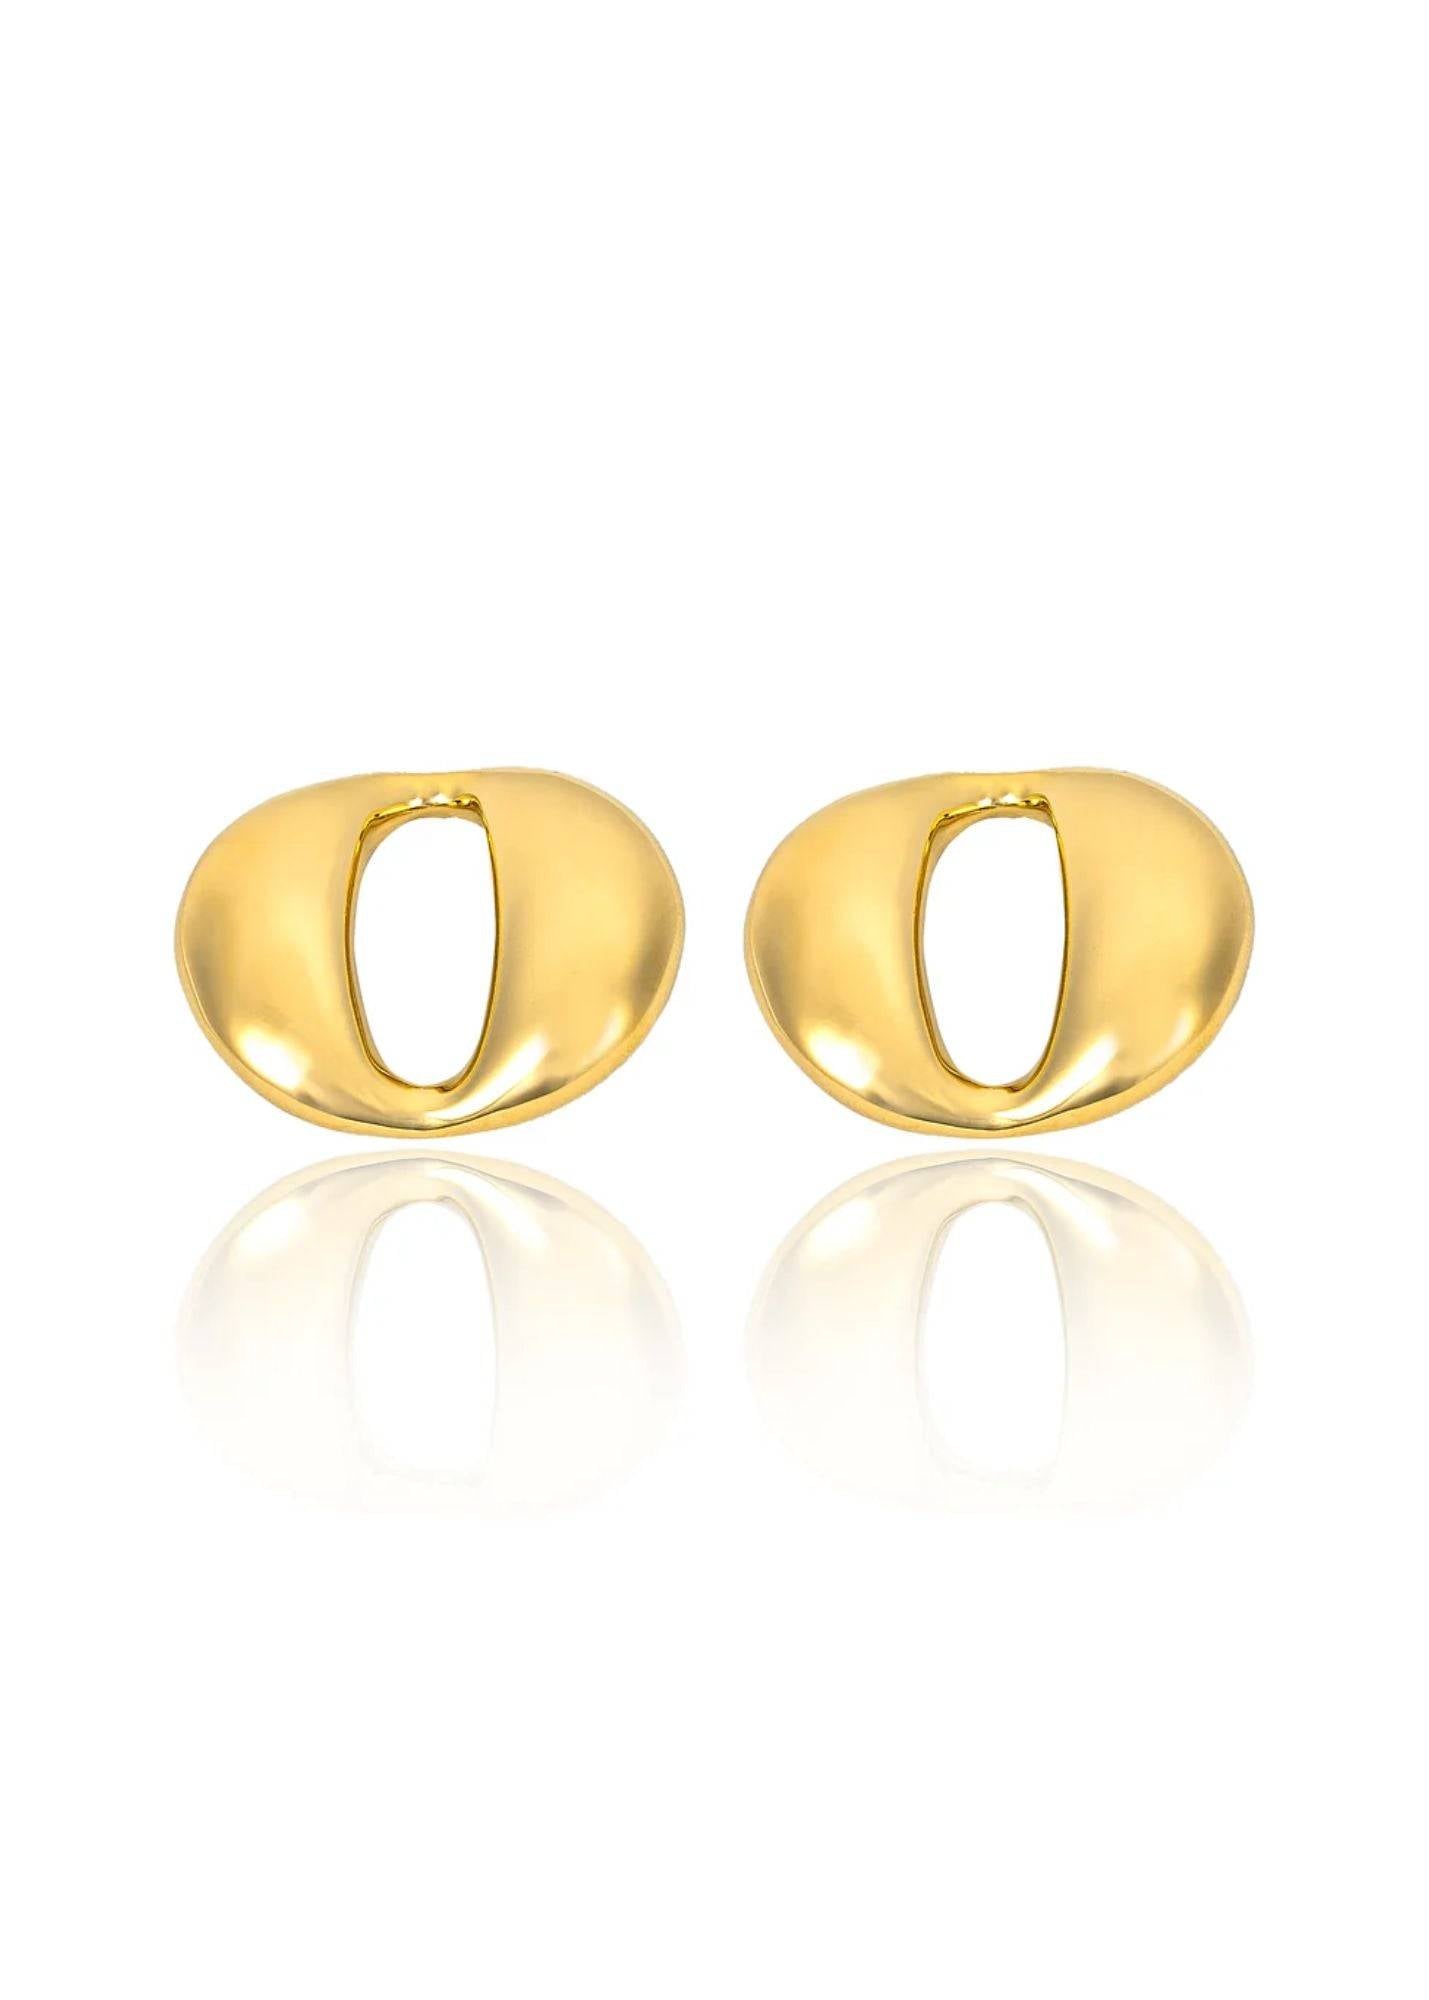 Smooth Omicron Shaped 18K Gold Filled Statement Stud Earrings